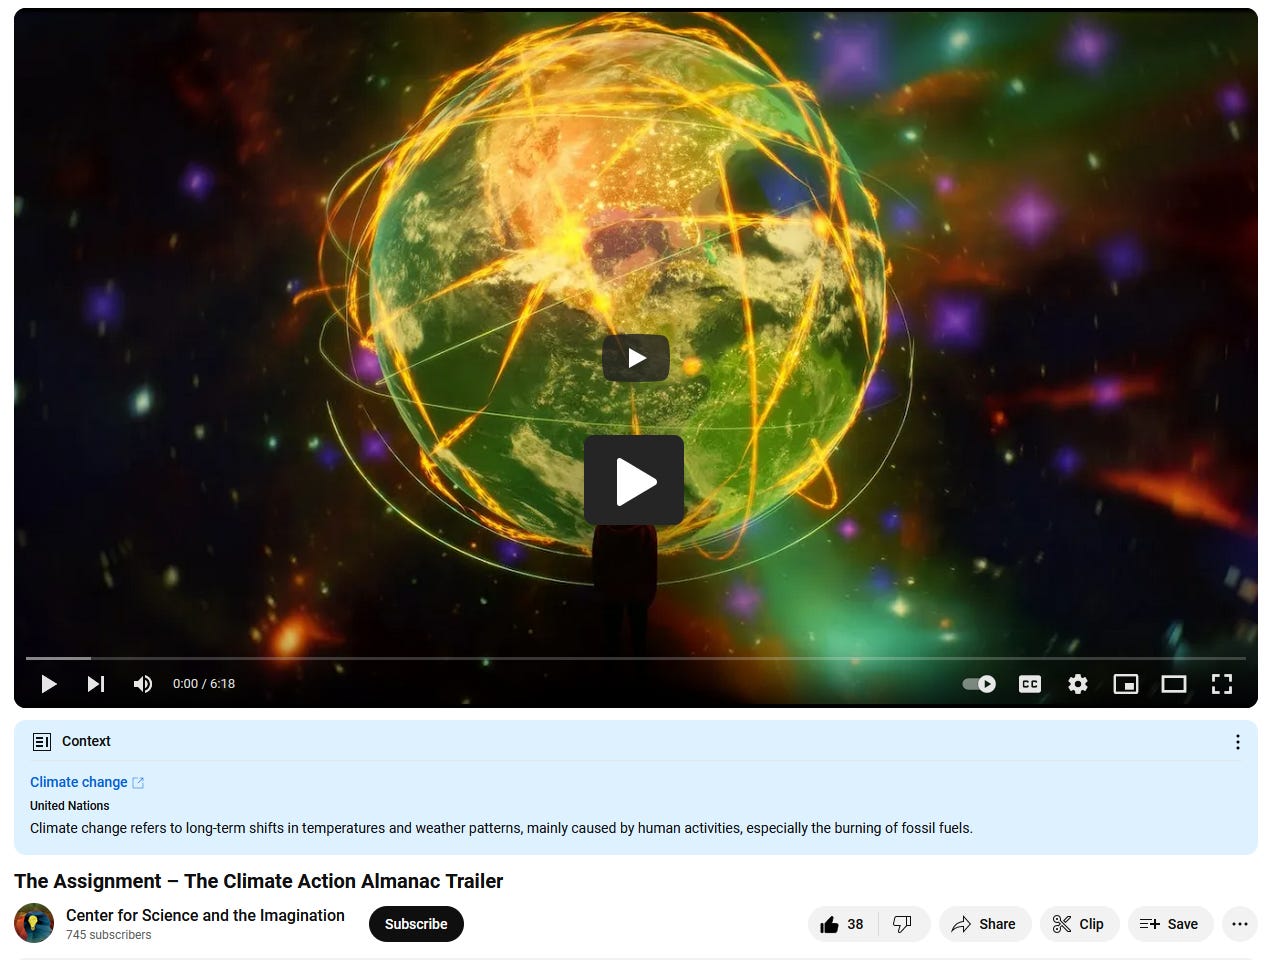 screencap from youtube video of The Assignment - The Climate Action Almanac Trailer, Center for Science and the Imagination